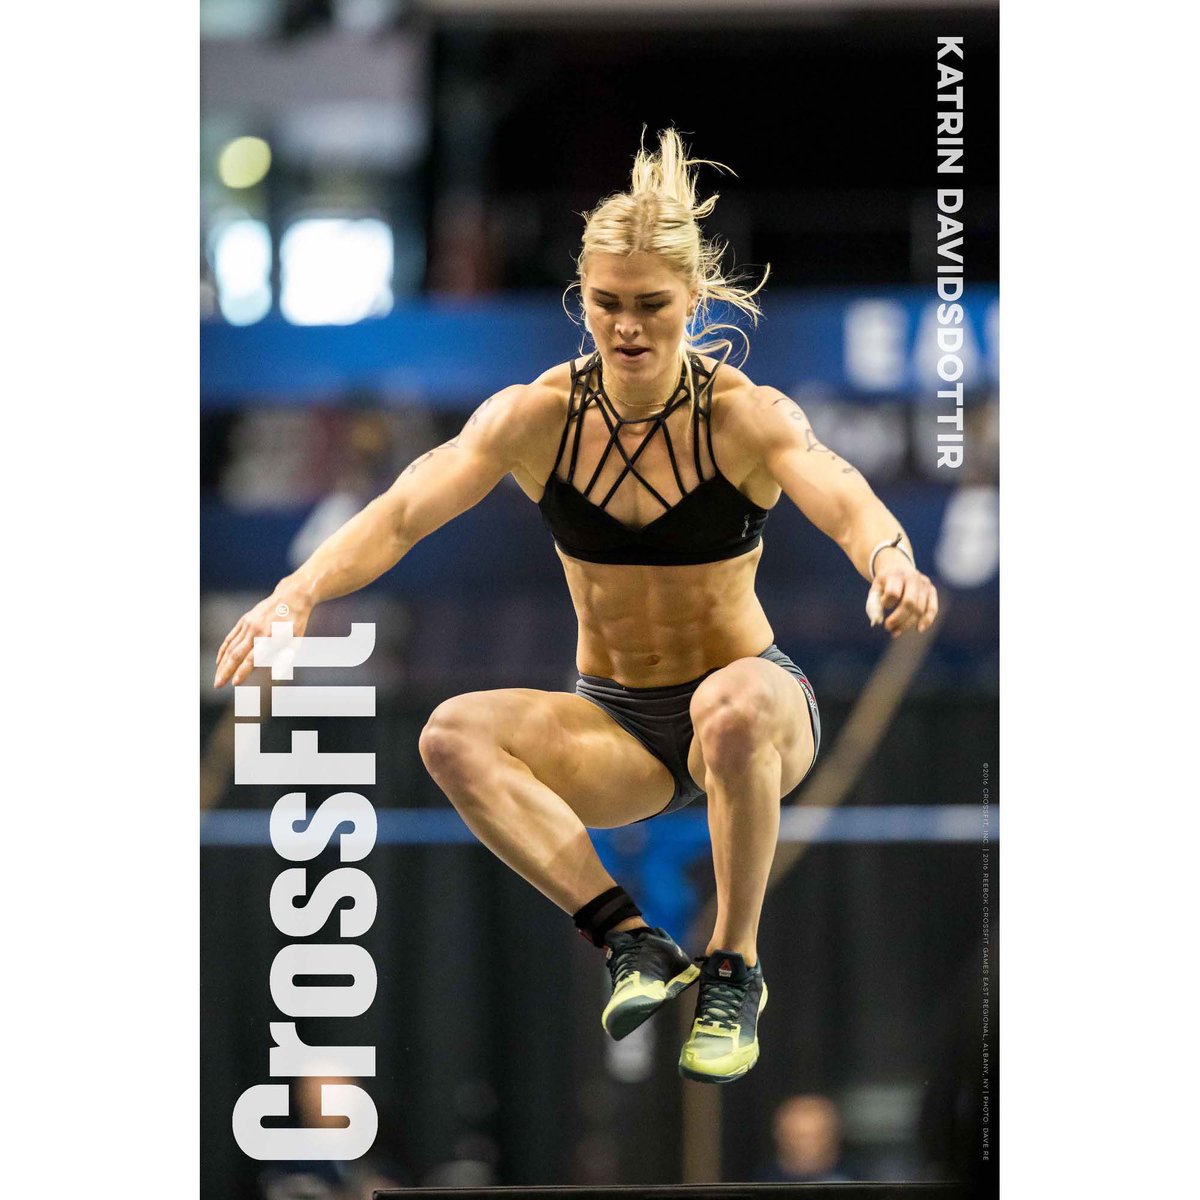 The CrossFit Games on Twitter: "Posters of reigning back-to-back Fittest  Woman on Earth @katrintanja 🇮🇸 are now available https://t.co/fFN2kO3fM8  https://t.co/avUTuTFWmR" / Twitter